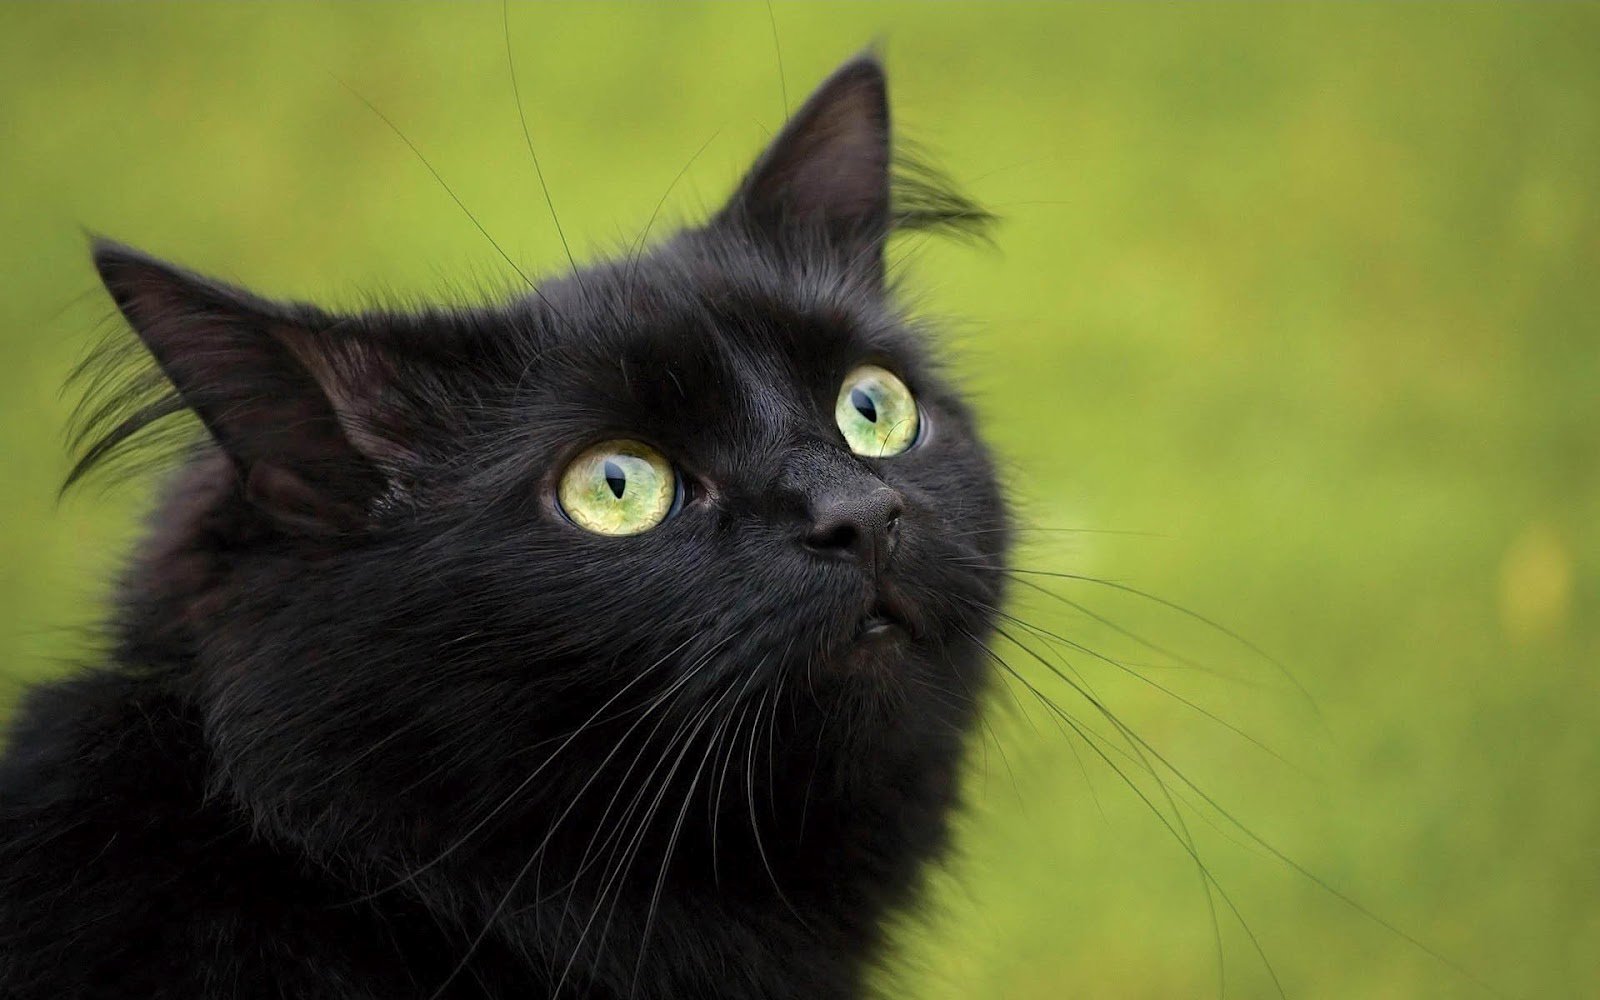 hd cats wallpaper with a black cat with green eyes hd cats wallpapers